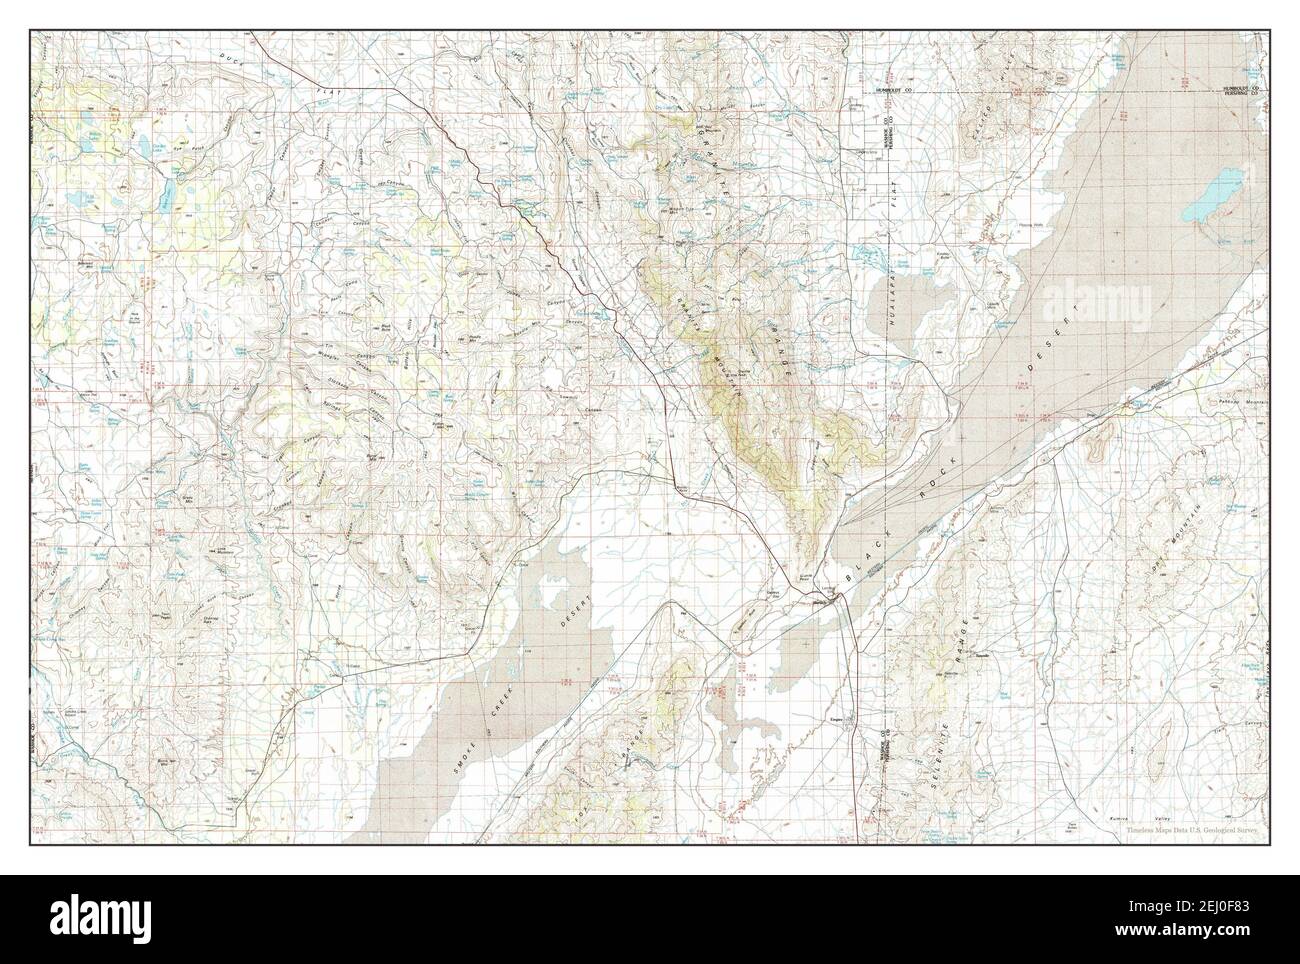 Gerlach, Nevada, map 1981, 1:100000, United States of America by Timeless Maps, data U.S. Geological Survey Stock Photo